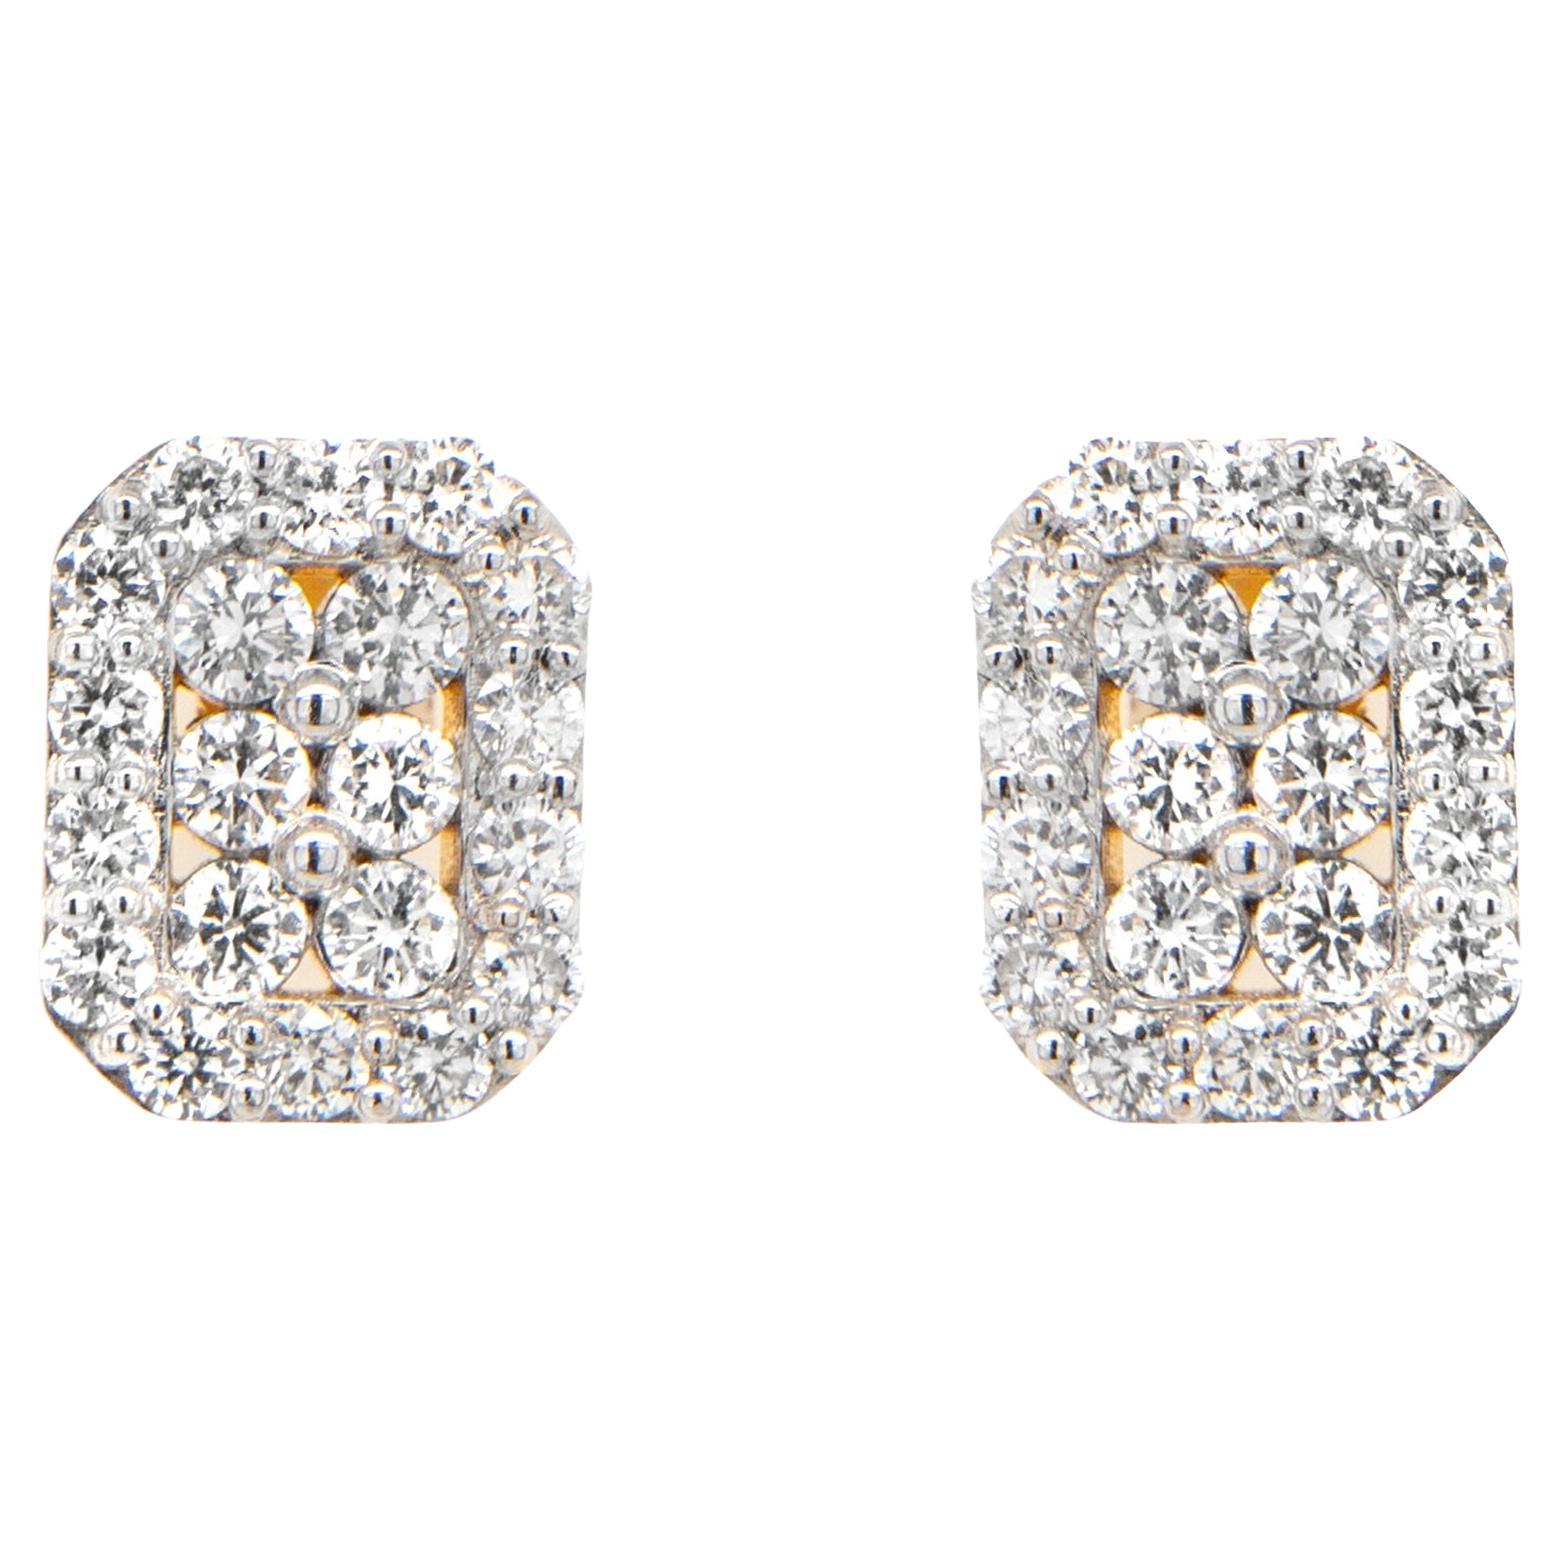 Diamond Stud Earrings 1.60 Carats Total 18k Yellow Gold For Sale